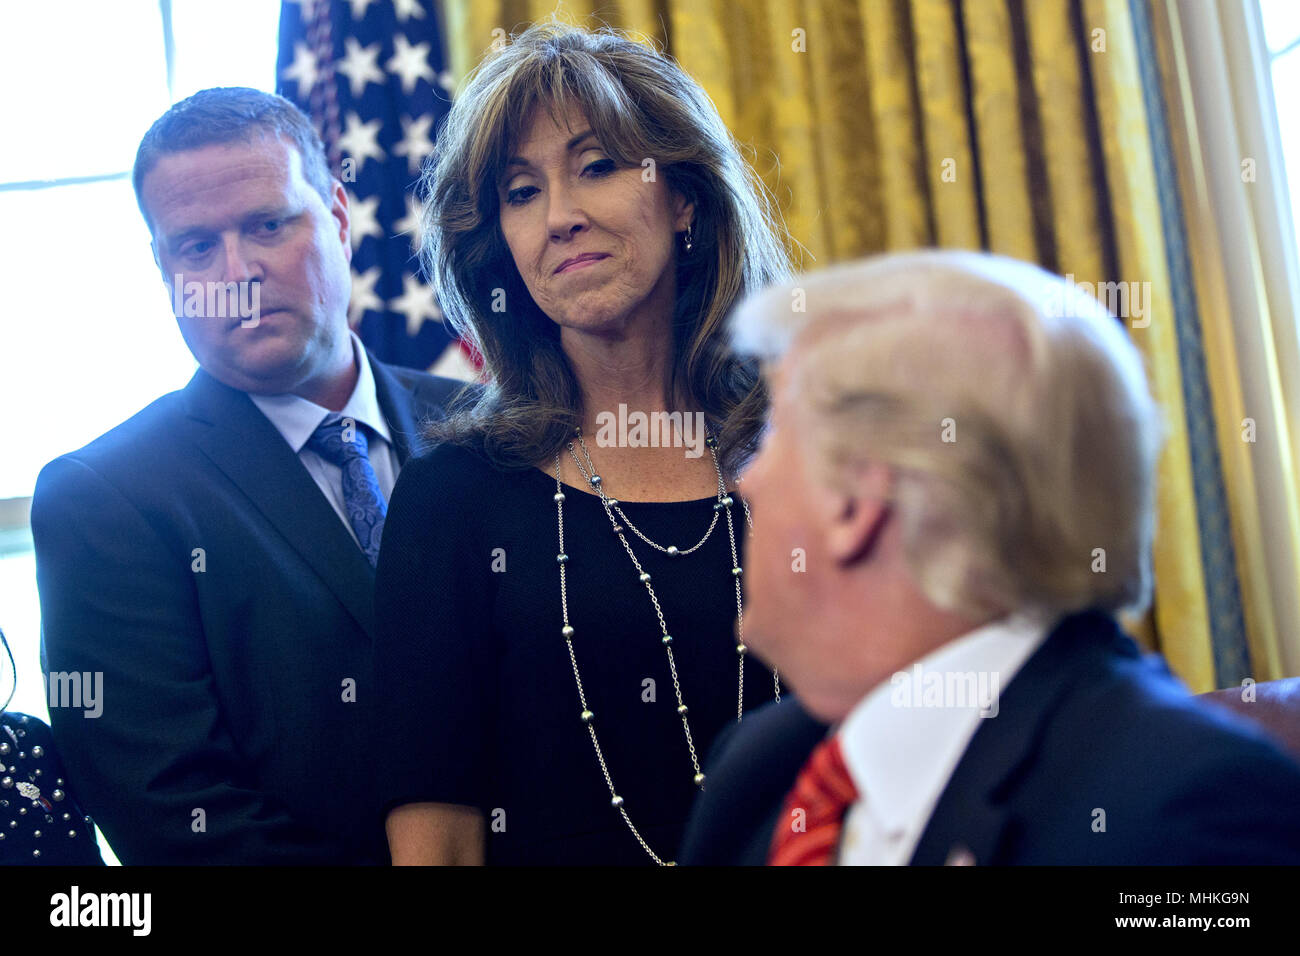 Tammie Jo Shults, a Southwest Airlines Co. captain, center, and Darren Ellisor, a Southwest Airlines first officer, left, listen as U.S. President Donald Trump speaks while meeting with the crew and passengers of Southwest Airlines Co. flight 1380 in the Oval Office of the White House in Washington, DC, U.S., on Tuesday, May 1, 2018. An engine on Southwest's flight 1380, a Boeing Co. 737-700 bound for Dallas from New York's LaGuardia airport, exploded and made an emergency landing on April 17 sending shrapnel into the plane and killing a passenger seated near a window. Credit: Andrew Harrer Stock Photo